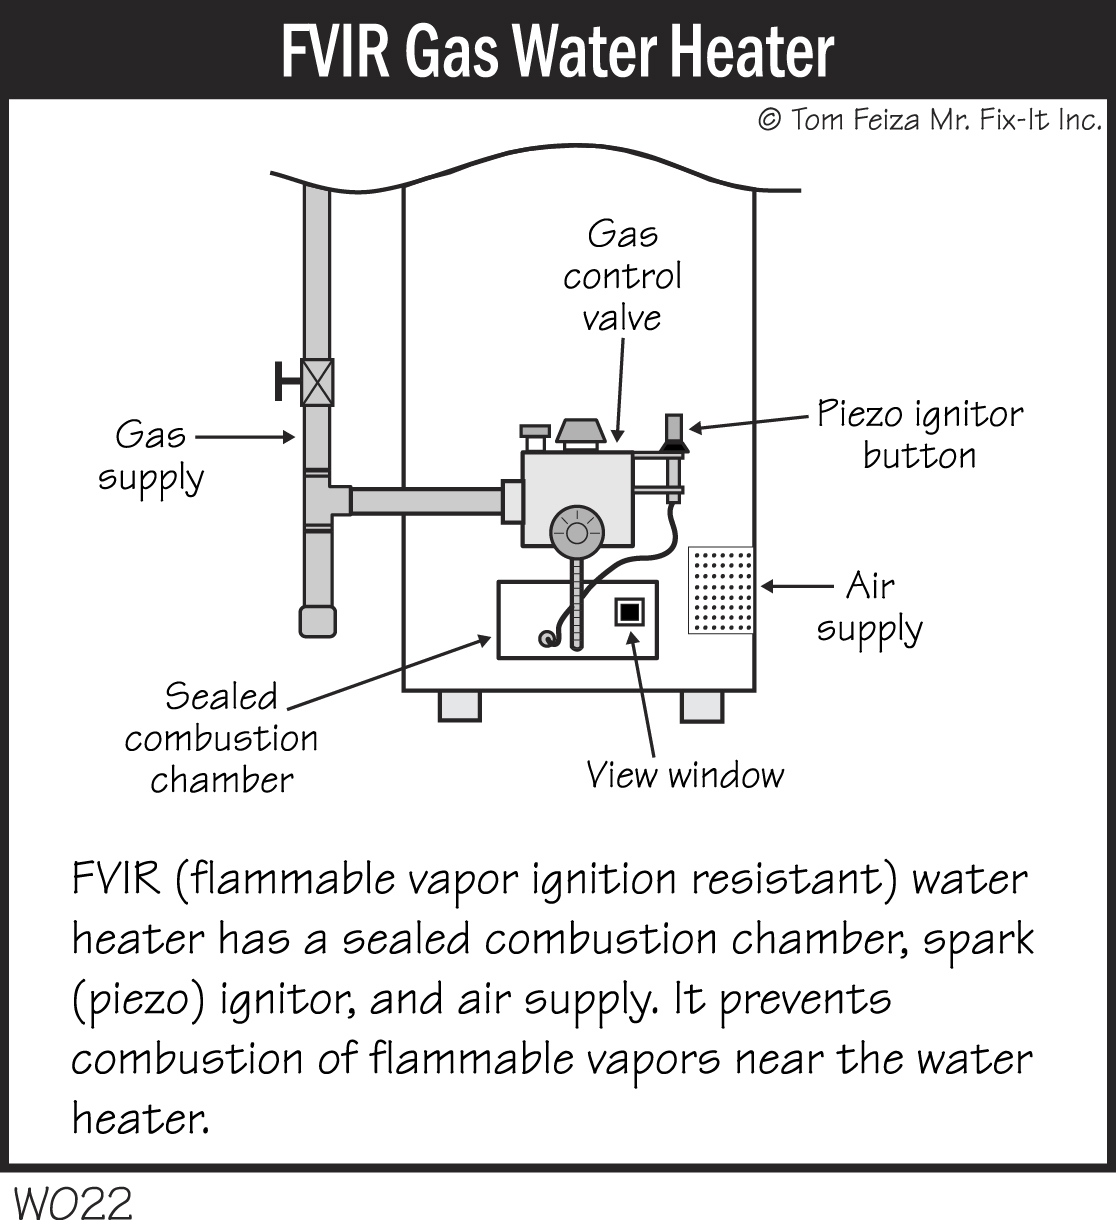 w022-fvir-gas-water-heater-covered-bridge-professional-home-inspections